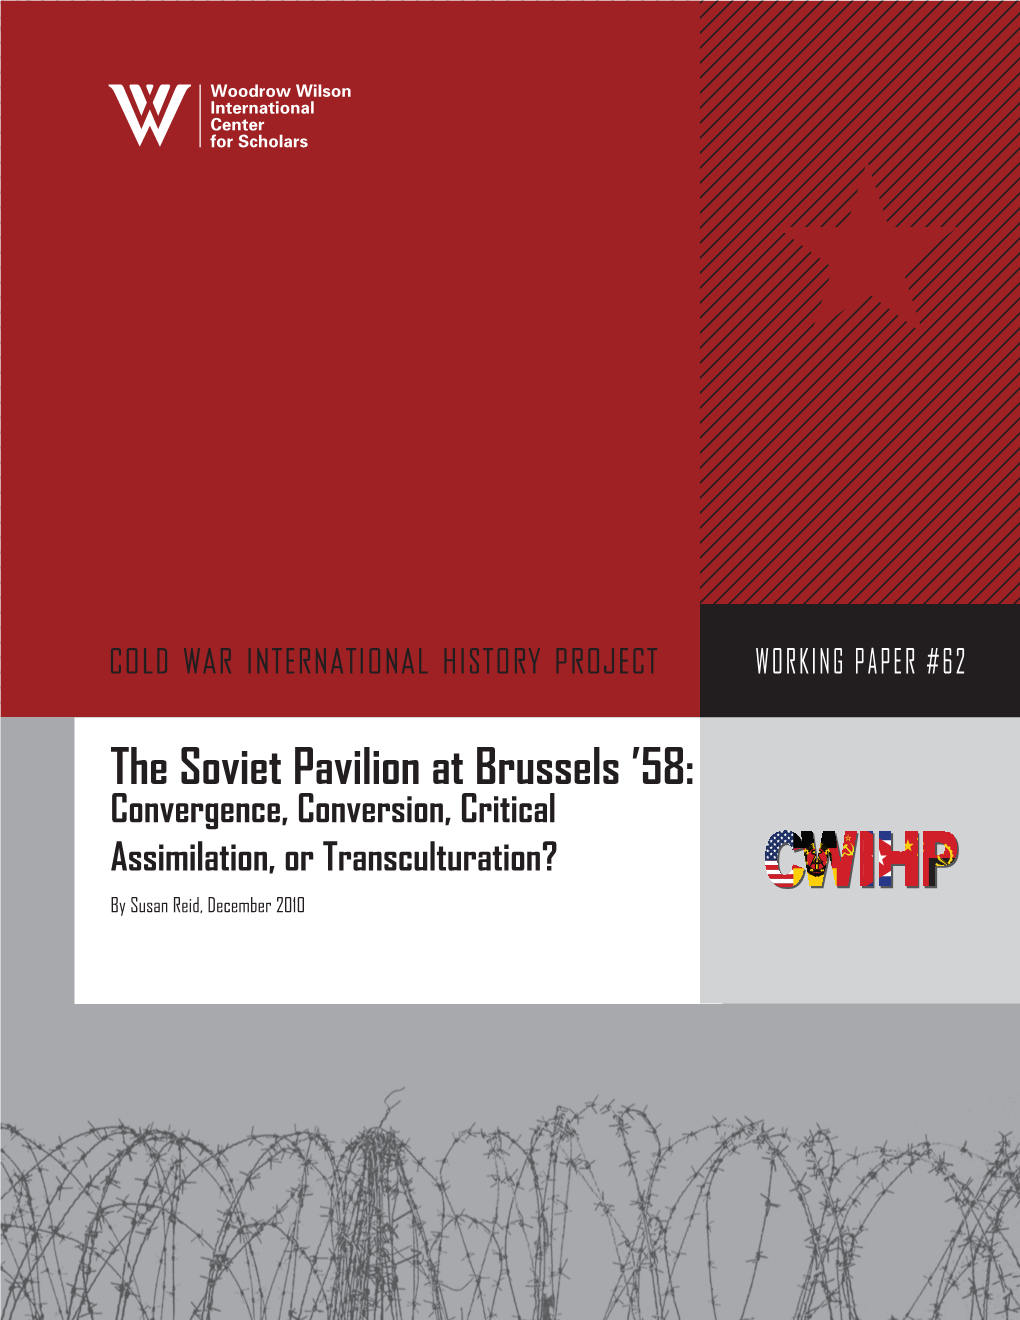 The Soviet Pavilion at Brussels ’58: Convergence, Conversion, Critical Assimilation, Or Transculturation? by Susan Reid, December 2010